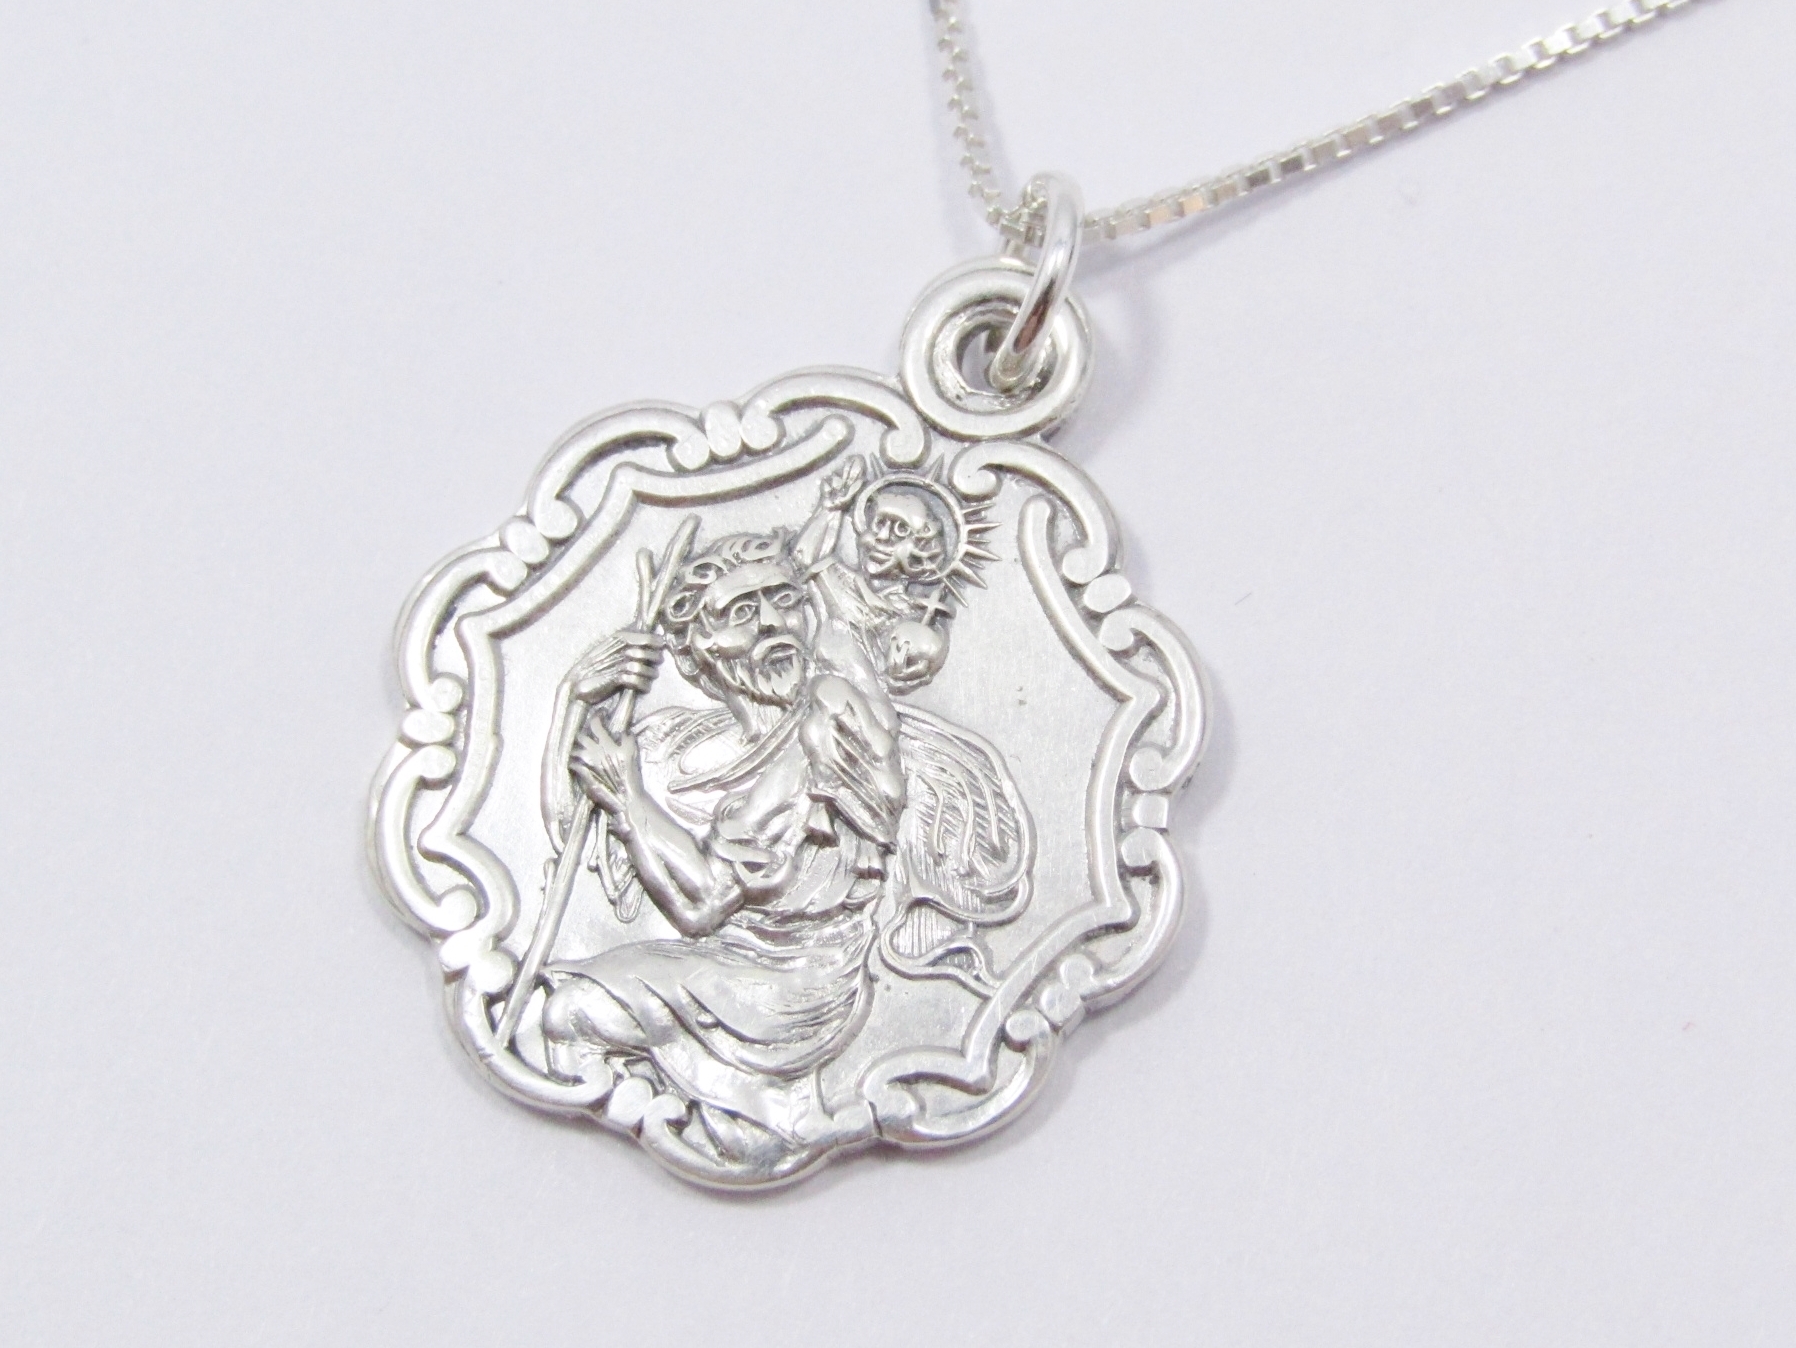 A Stunning ! Vintage Detailed St Cristopher Pendant on Chain in Sterling Silver.